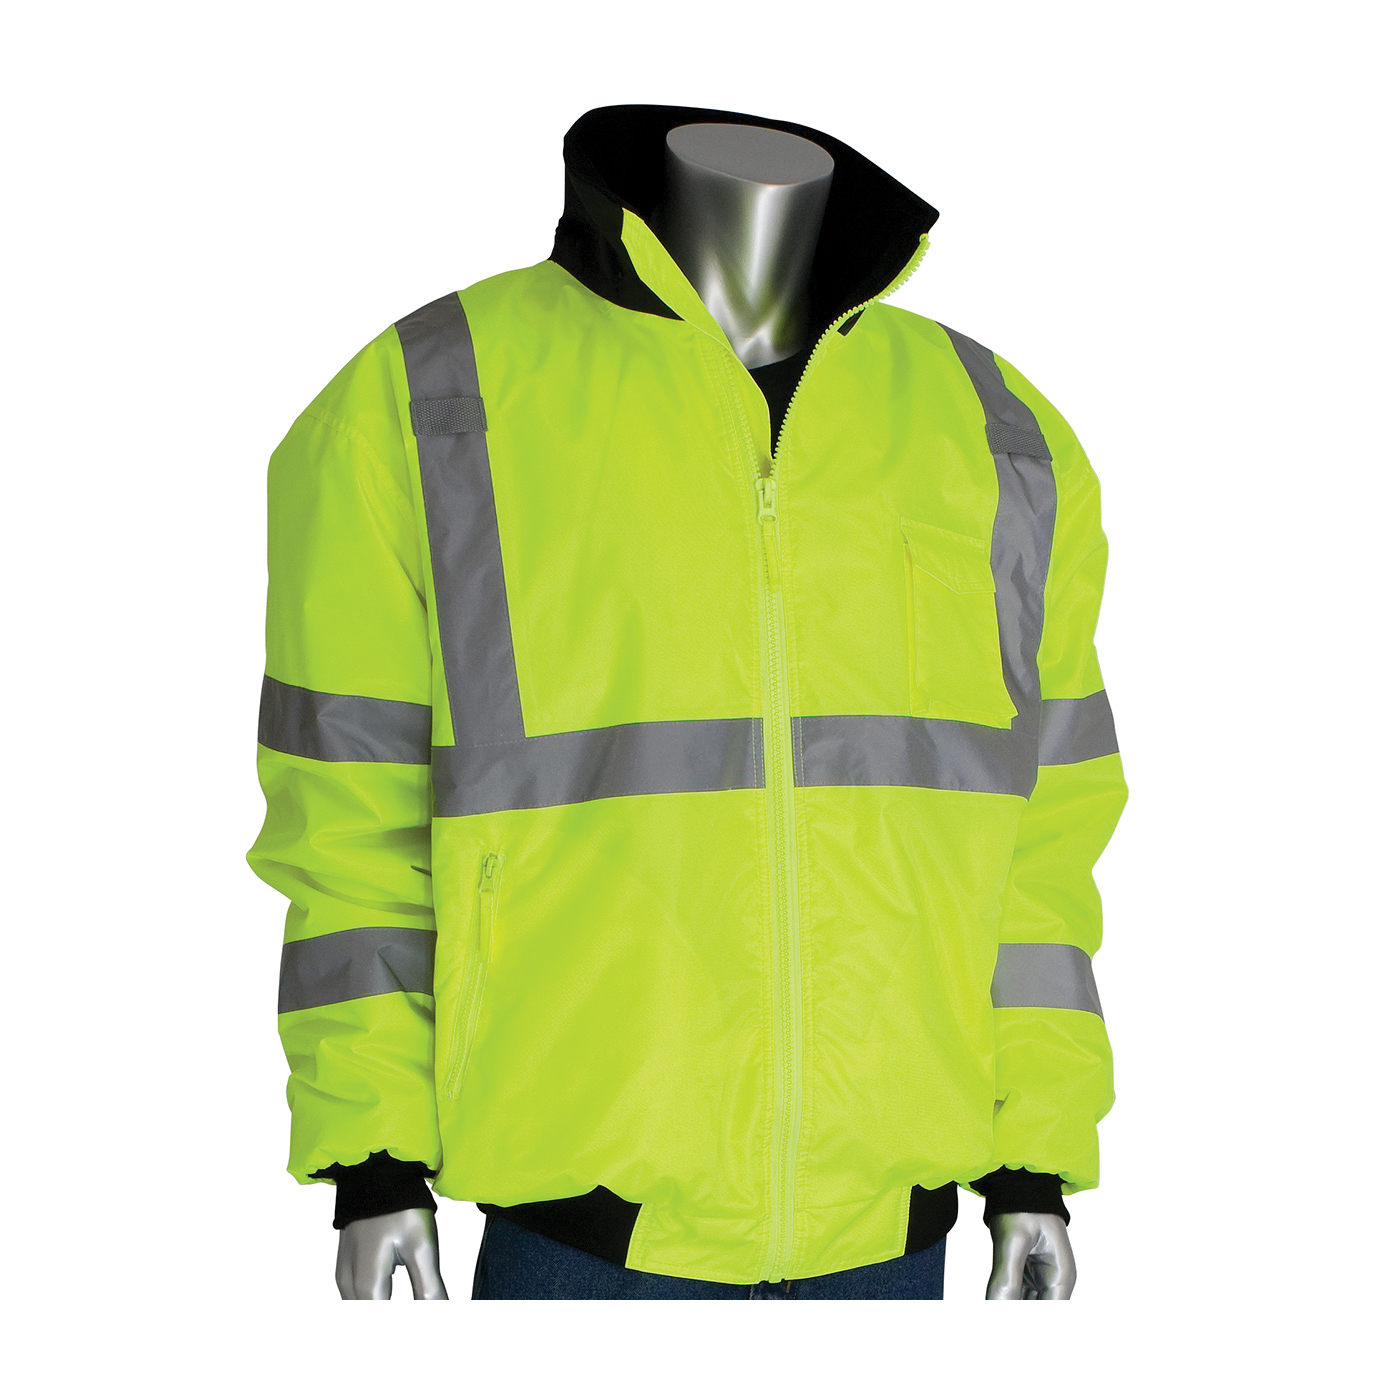 PIP® 333-1762-LY/5X Bomber Jacket With Zip-Out Fleece Liner, Hi-Viz Lime Yellow, Polyester, 74 in Chest, Resists: Water, Specifications Met: ANSI 107 Class 3 Type R